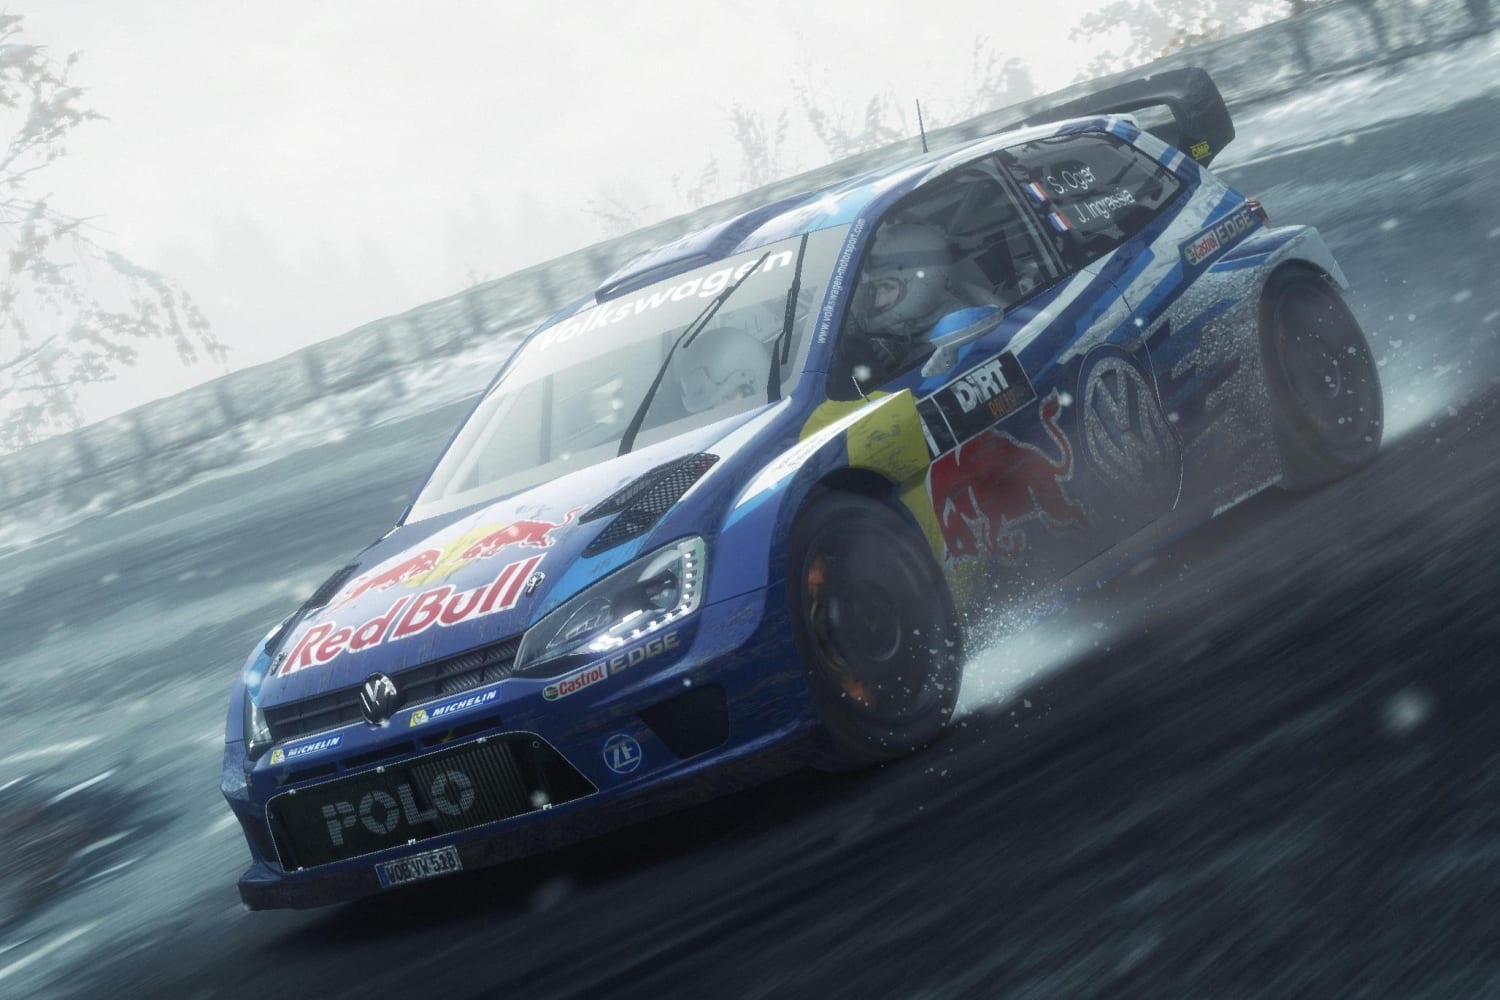 I'm gutted - Dirt Rally VR DLC for PSVR1 now gone from PS Store